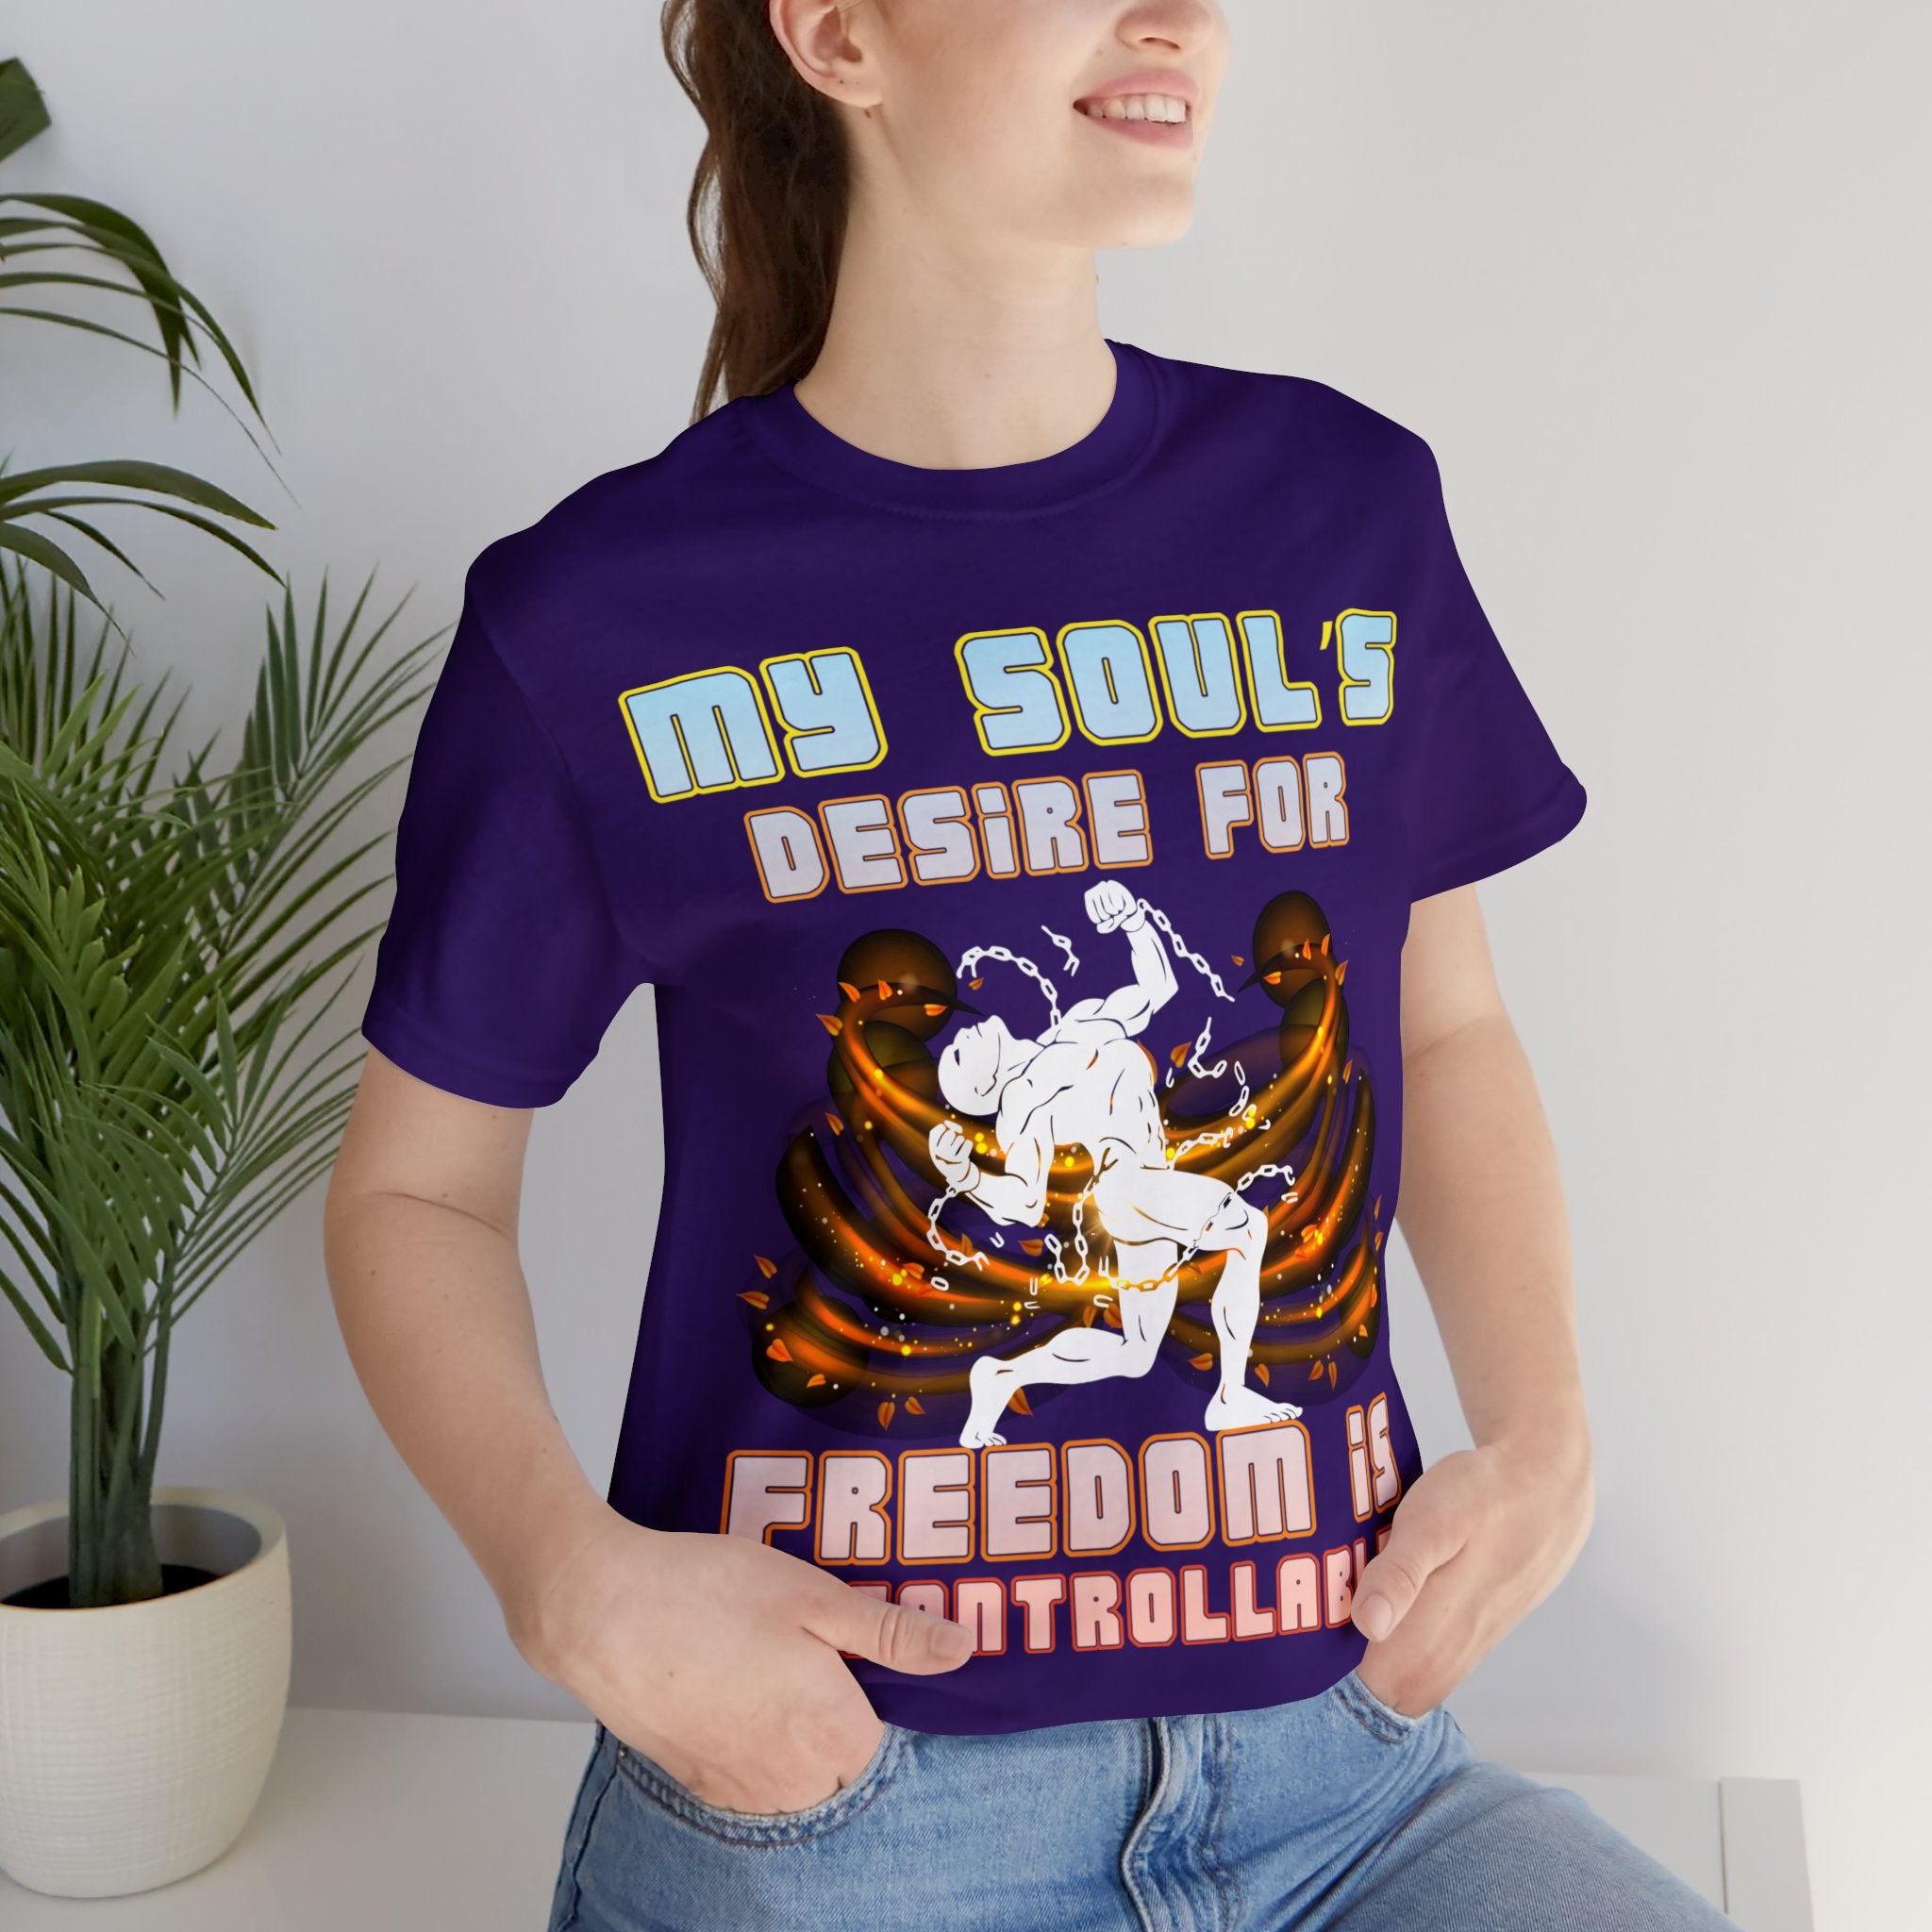 My Soul's Desire For Freedom